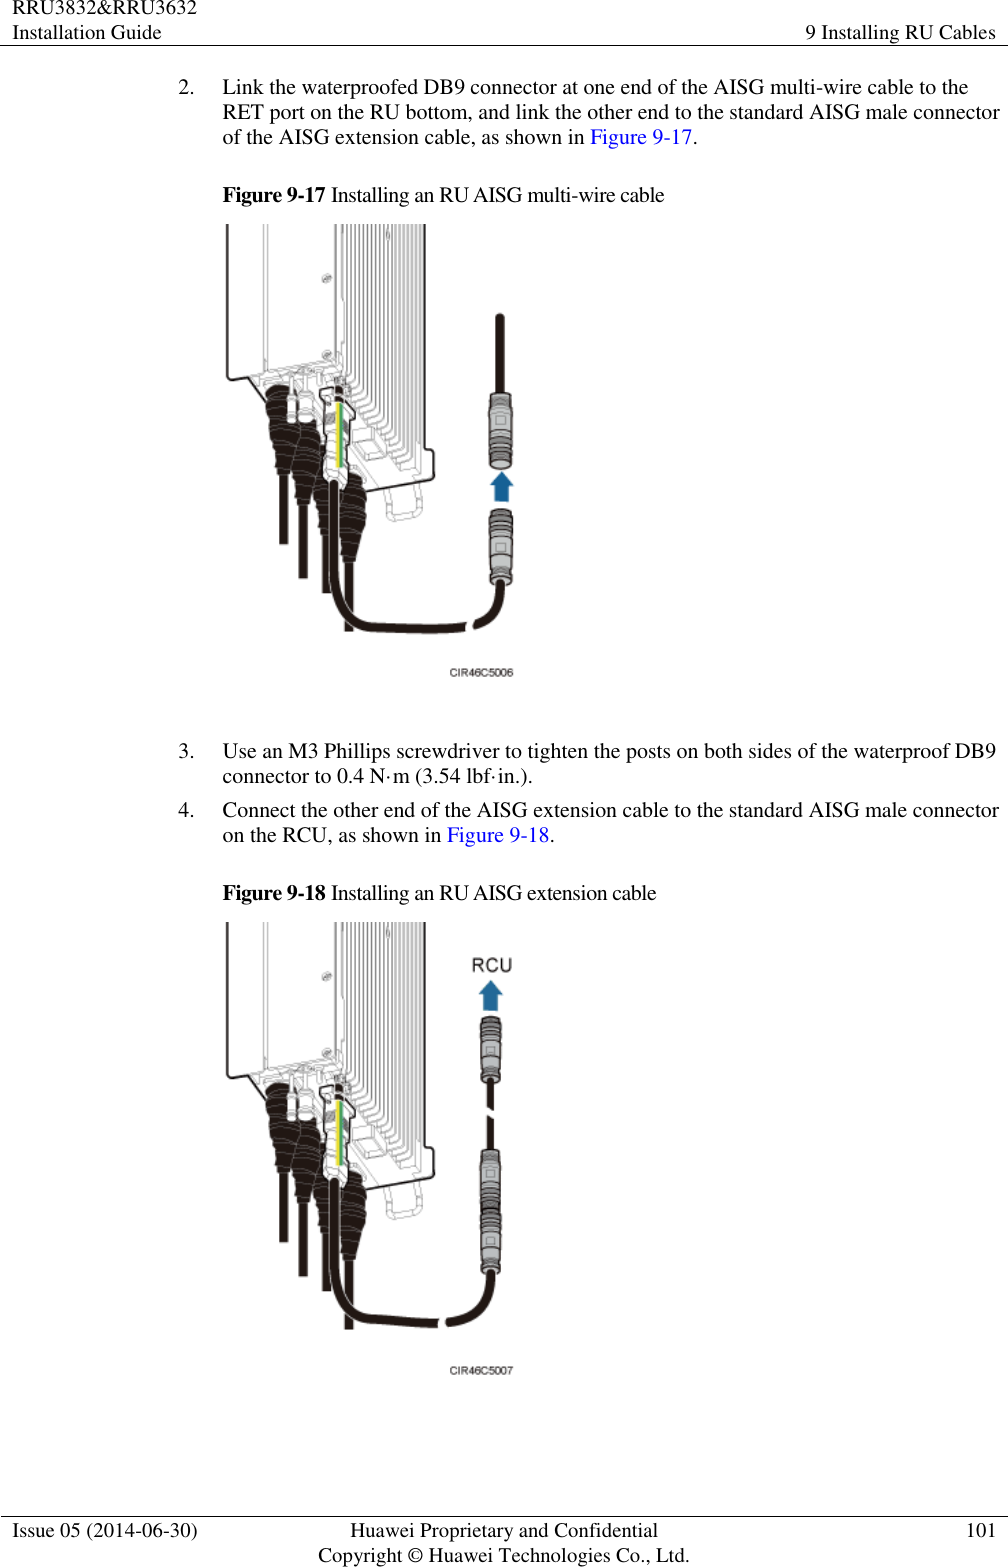 RRU3832&amp;RRU3632 Installation Guide 9 Installing RU Cables  Issue 05 (2014-06-30) Huawei Proprietary and Confidential                                     Copyright © Huawei Technologies Co., Ltd. 101  2. Link the waterproofed DB9 connector at one end of the AISG multi-wire cable to the RET port on the RU bottom, and link the other end to the standard AISG male connector of the AISG extension cable, as shown in Figure 9-17. Figure 9-17 Installing an RU AISG multi-wire cable   3. Use an M3 Phillips screwdriver to tighten the posts on both sides of the waterproof DB9 connector to 0.4 N·m (3.54 lbf·in.). 4. Connect the other end of the AISG extension cable to the standard AISG male connector on the RCU, as shown in Figure 9-18. Figure 9-18 Installing an RU AISG extension cable   